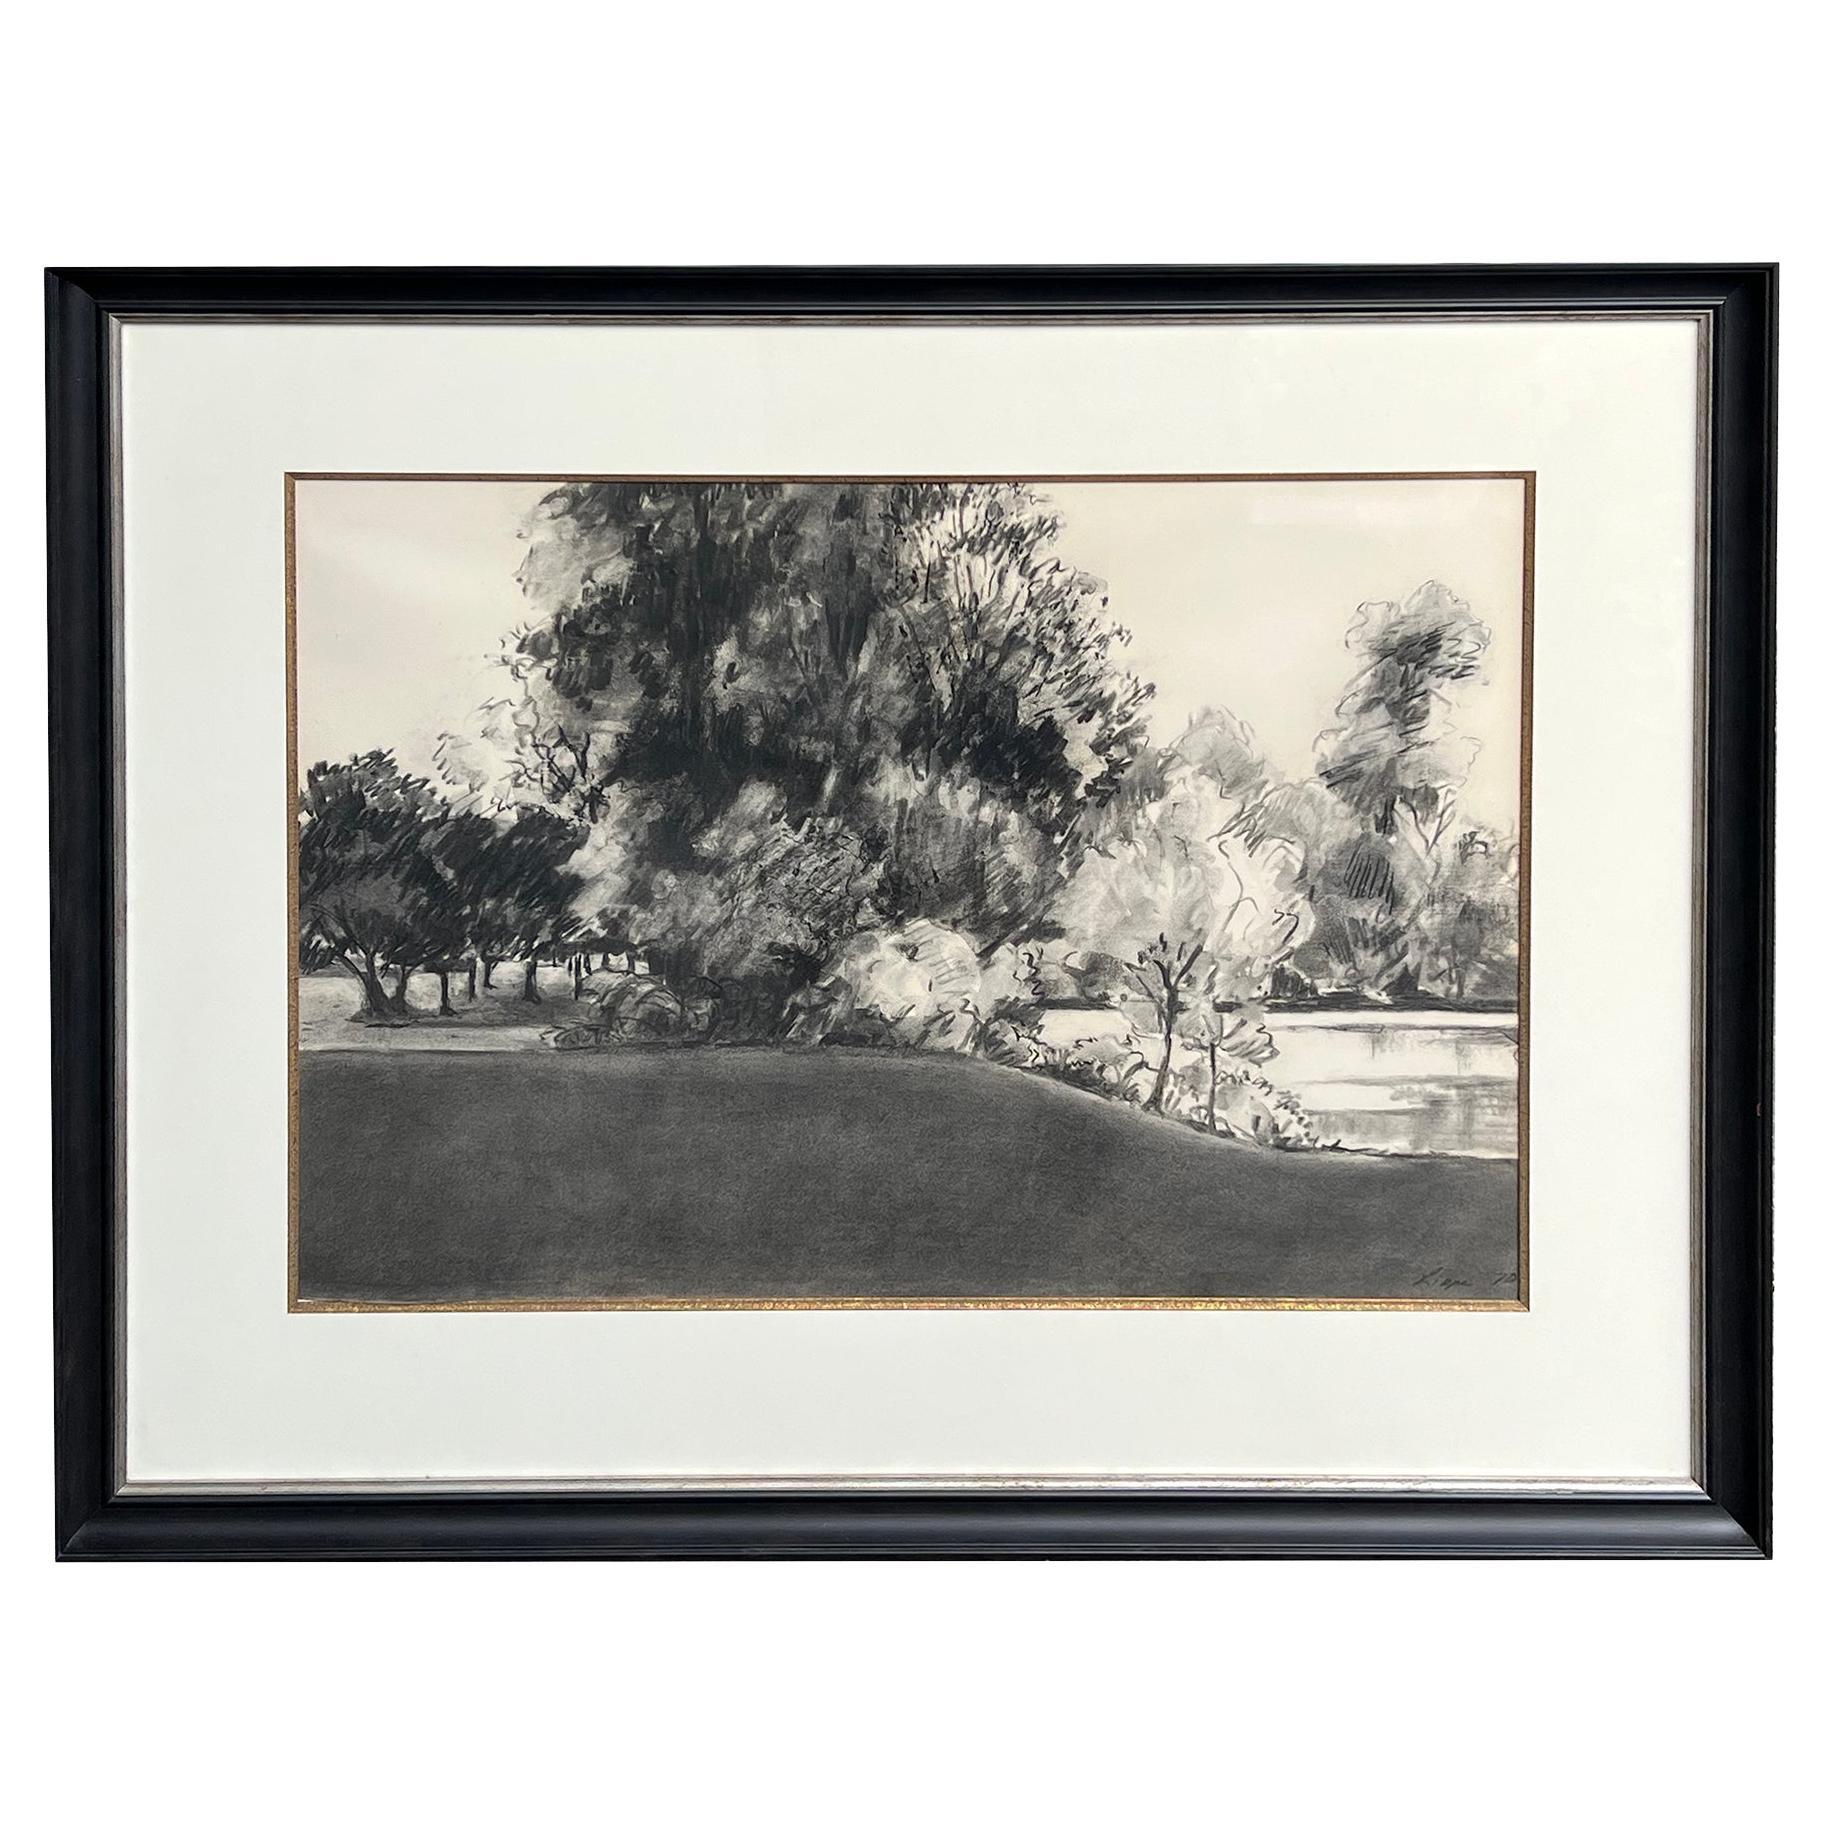 Charcoal on paper: 'The Edge of the Park' Signed 'Liepe '70'